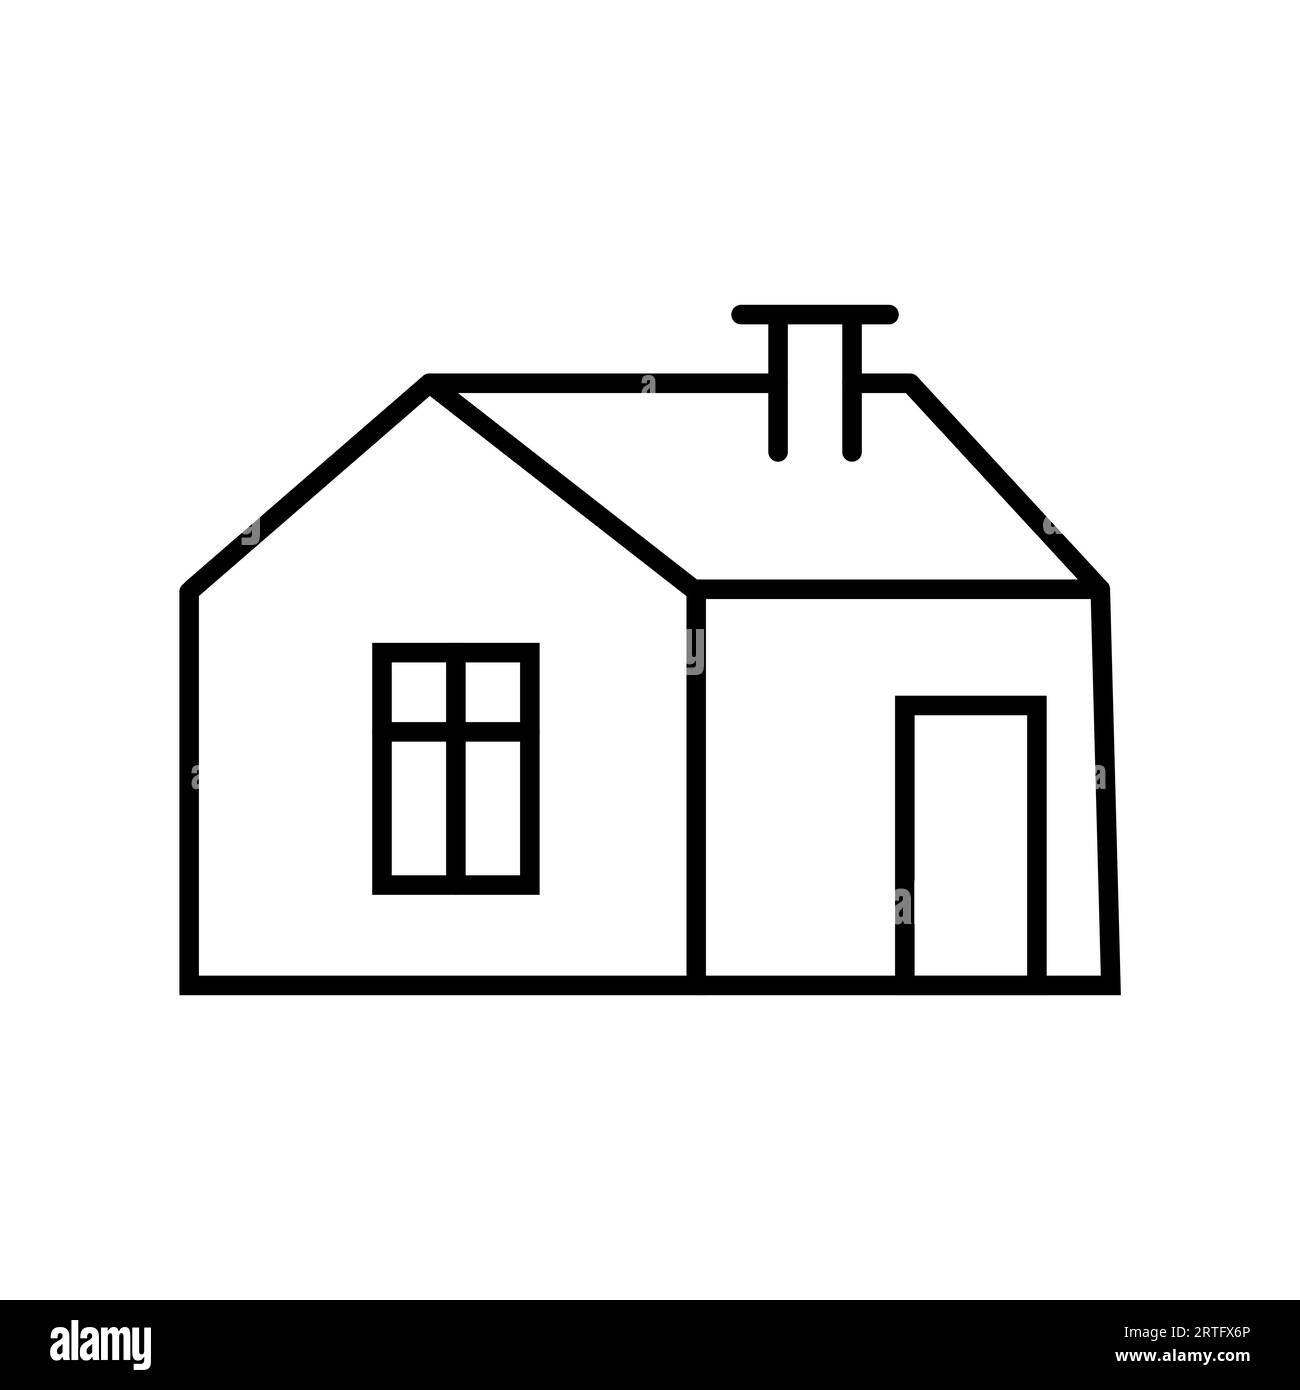 Black and white small simple linear icon of a beautiful festive New Year Christmas little house with a chimney and a sloping roof on a white backgroun Stock Vector